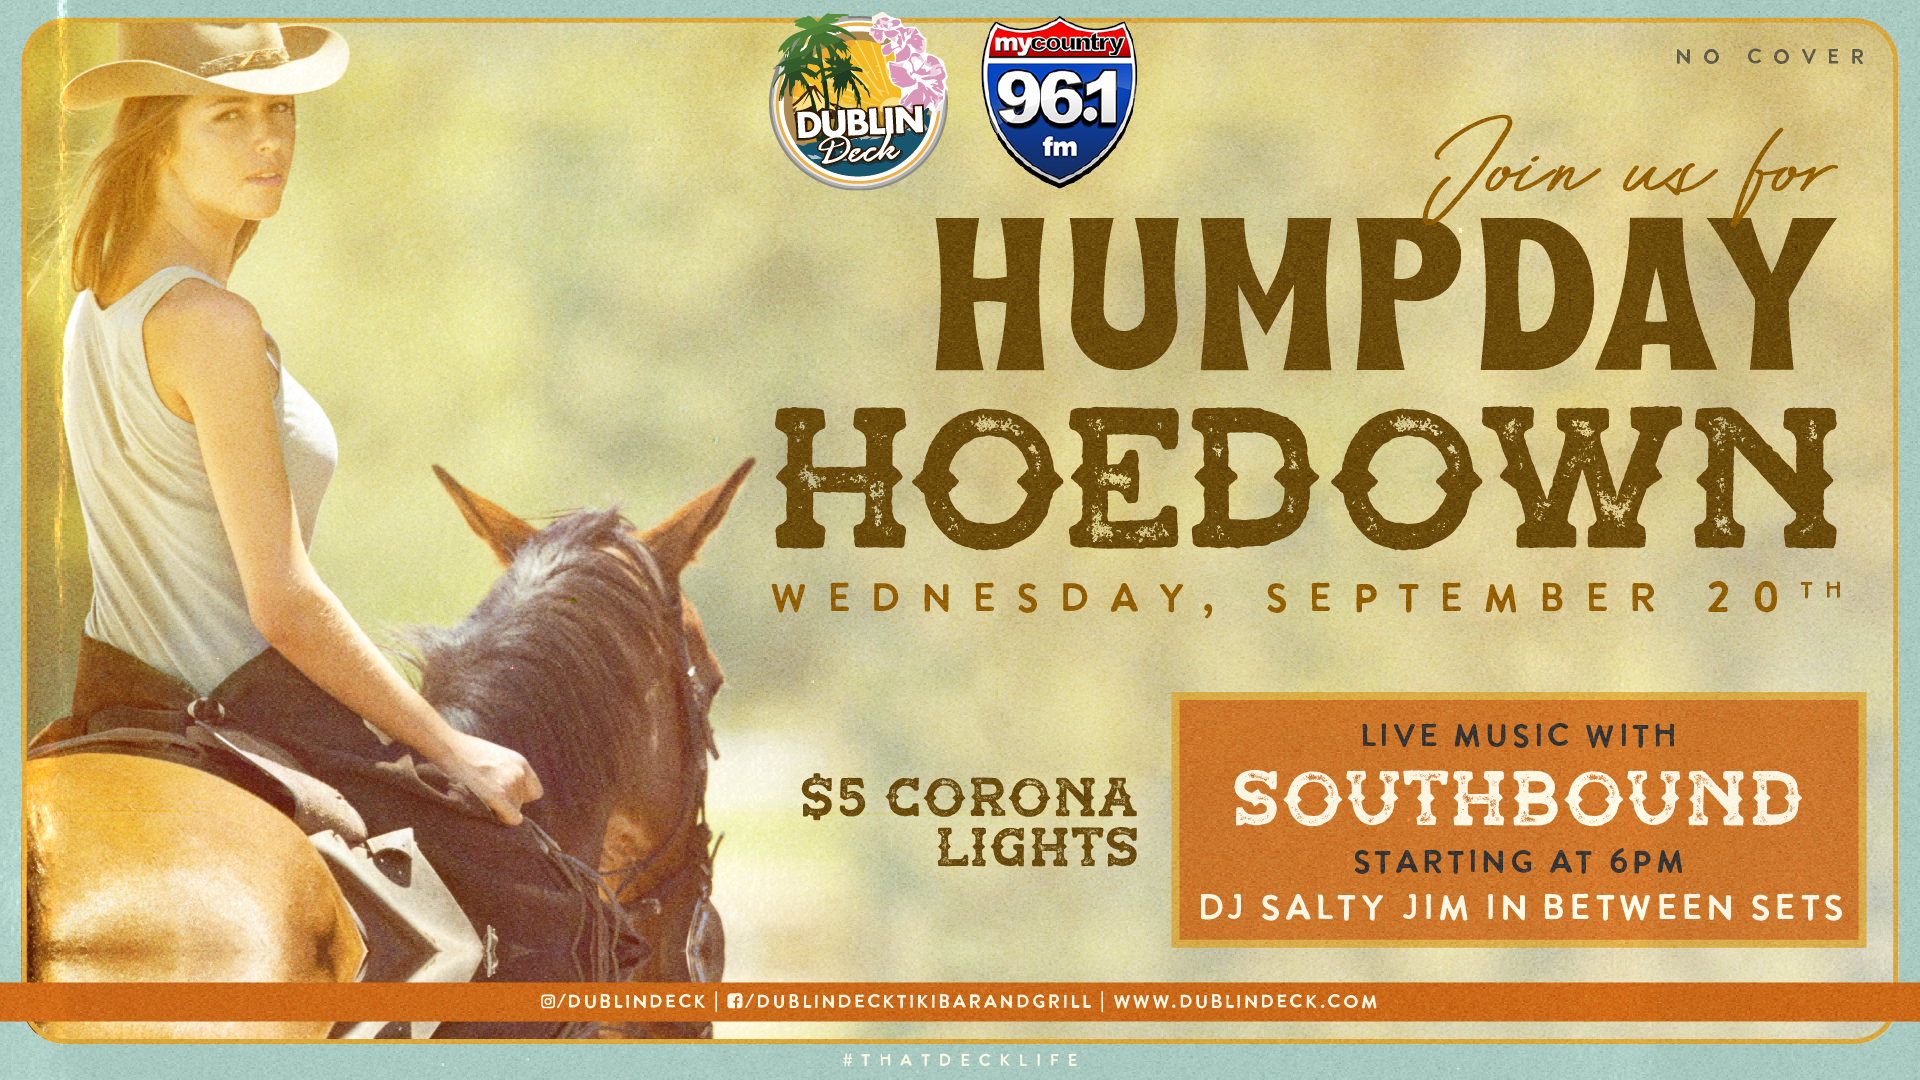 Saddle up for Humpday Hoedown with Southbound! Music begins at 6PM